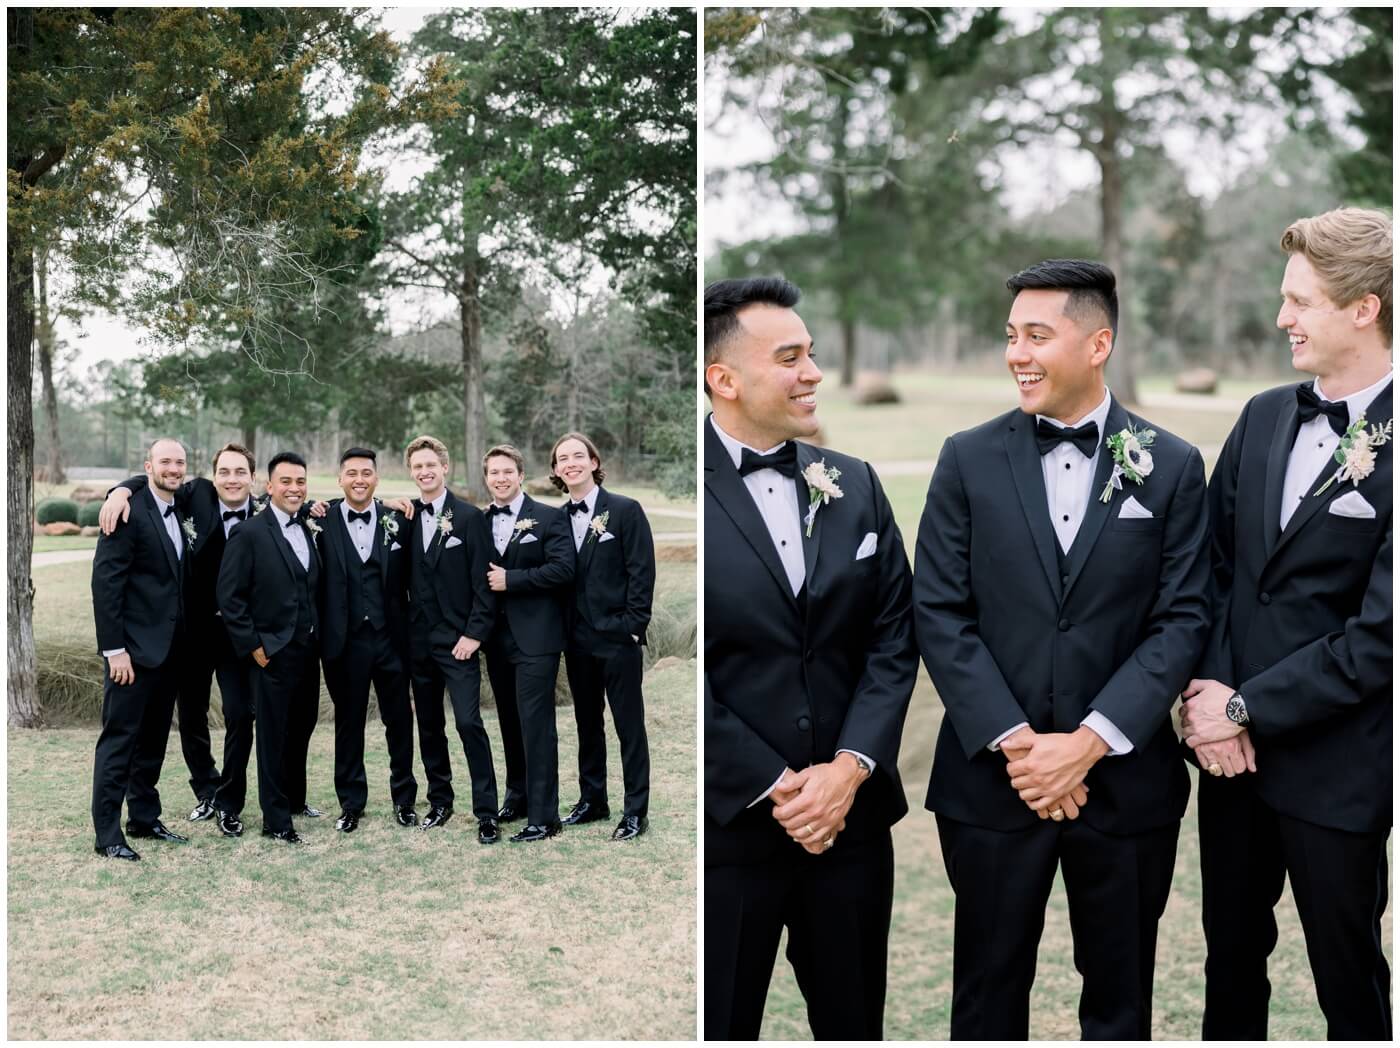 A groom and his groomsmen at the Vine